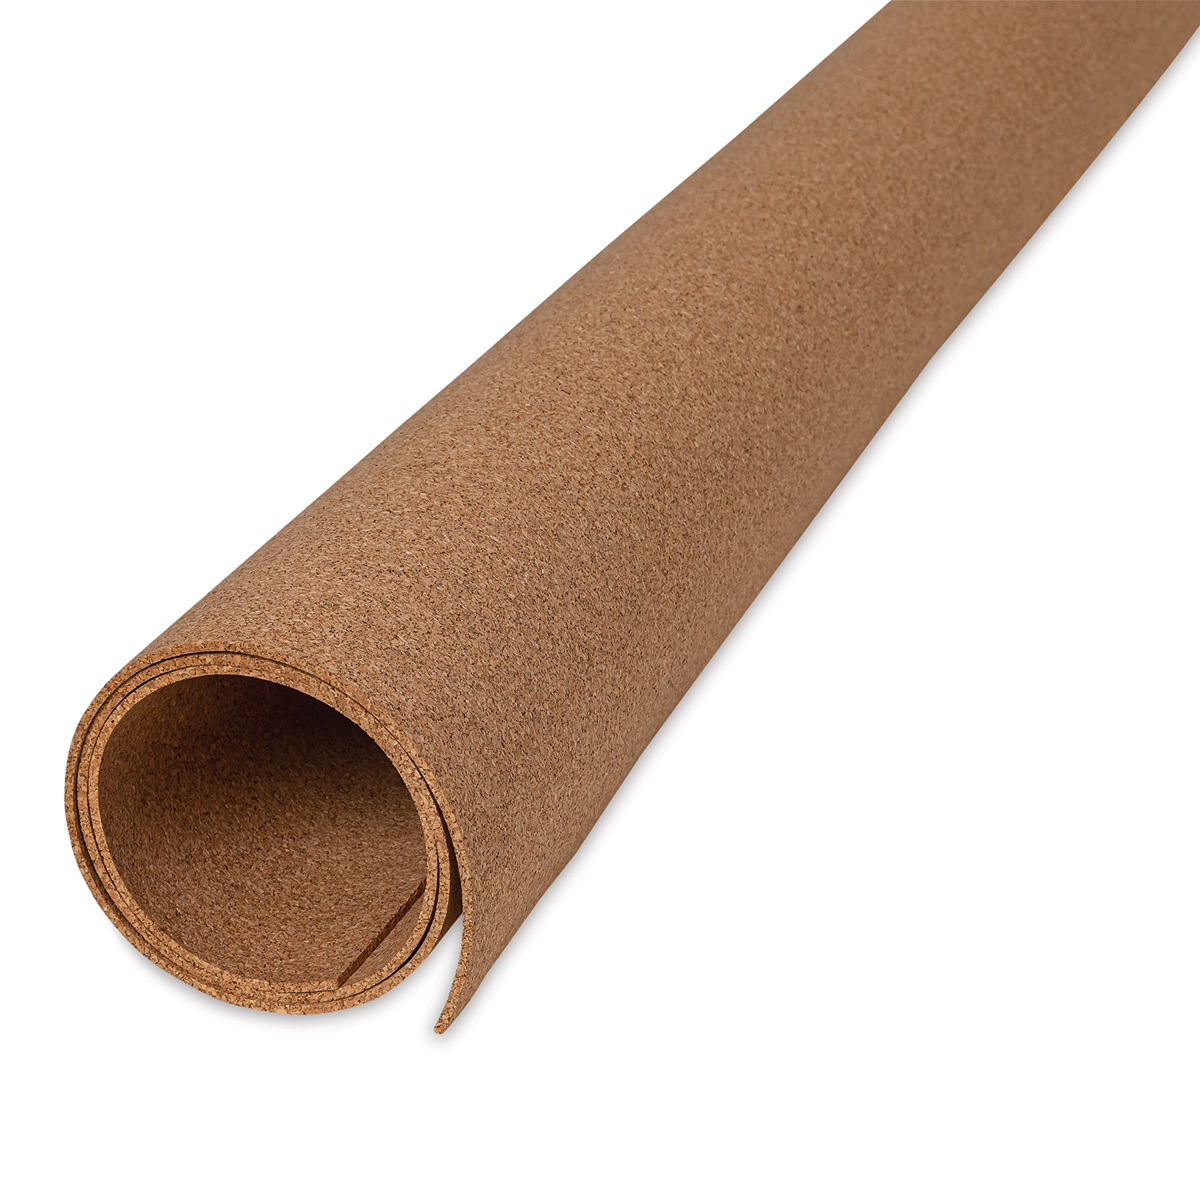 Natural Cork Roll - 1/8 thick, 48 wide, Per Yard